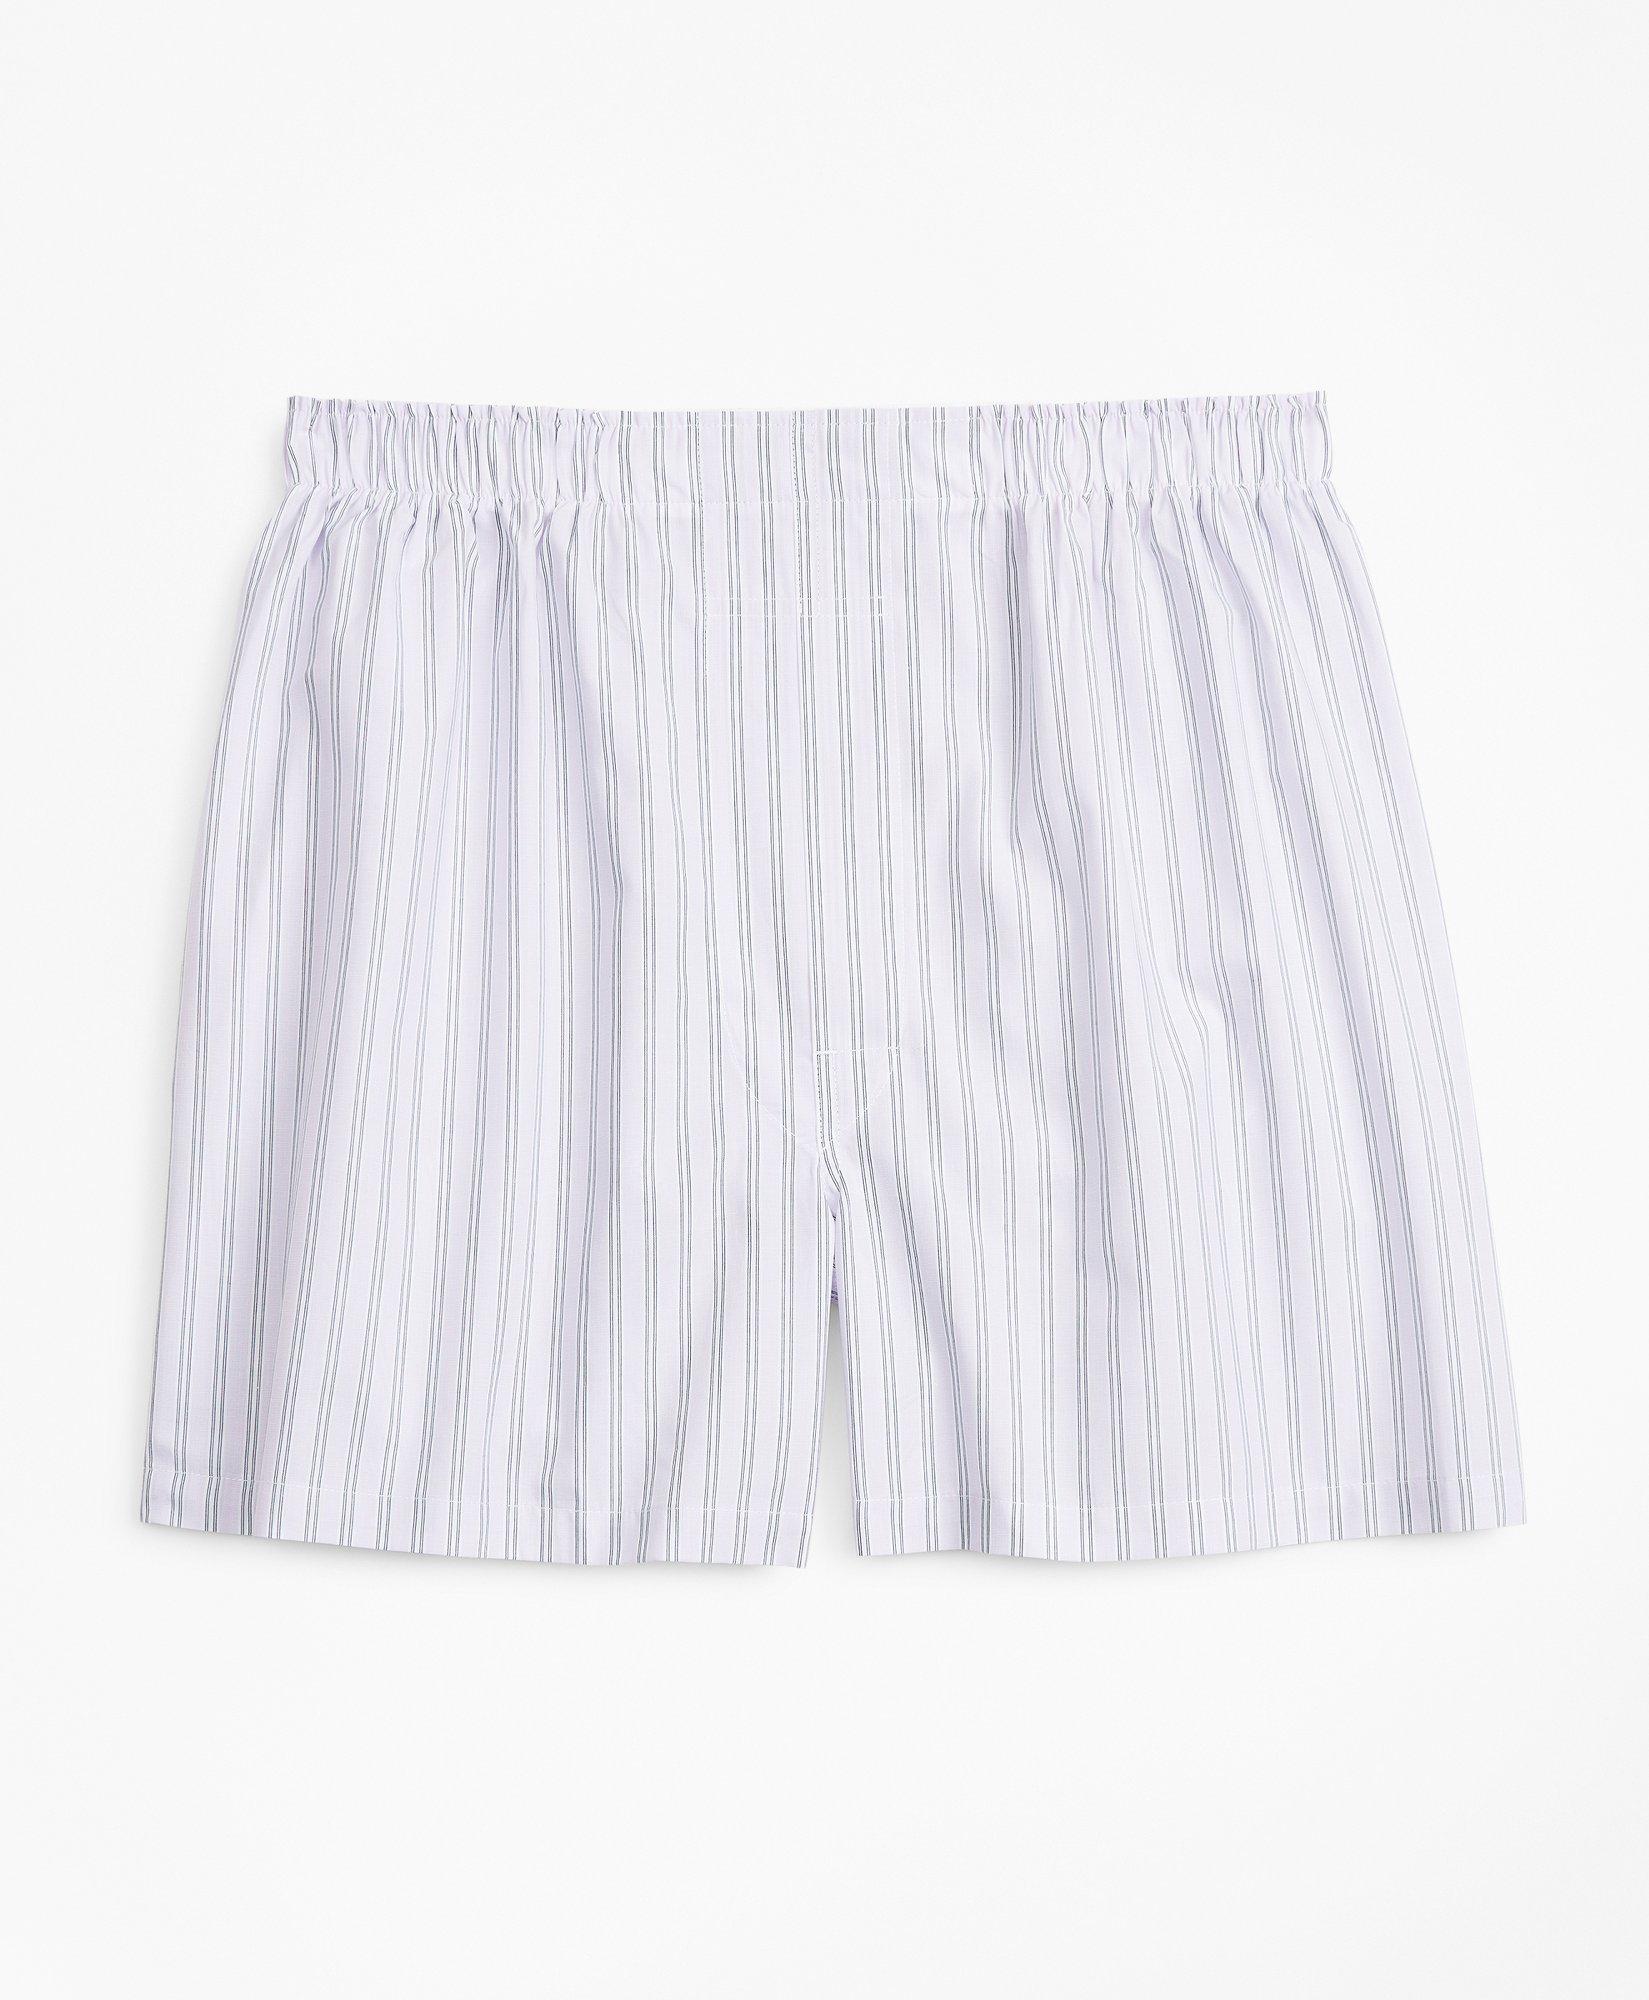 Traditional Fit Stripe Boxers